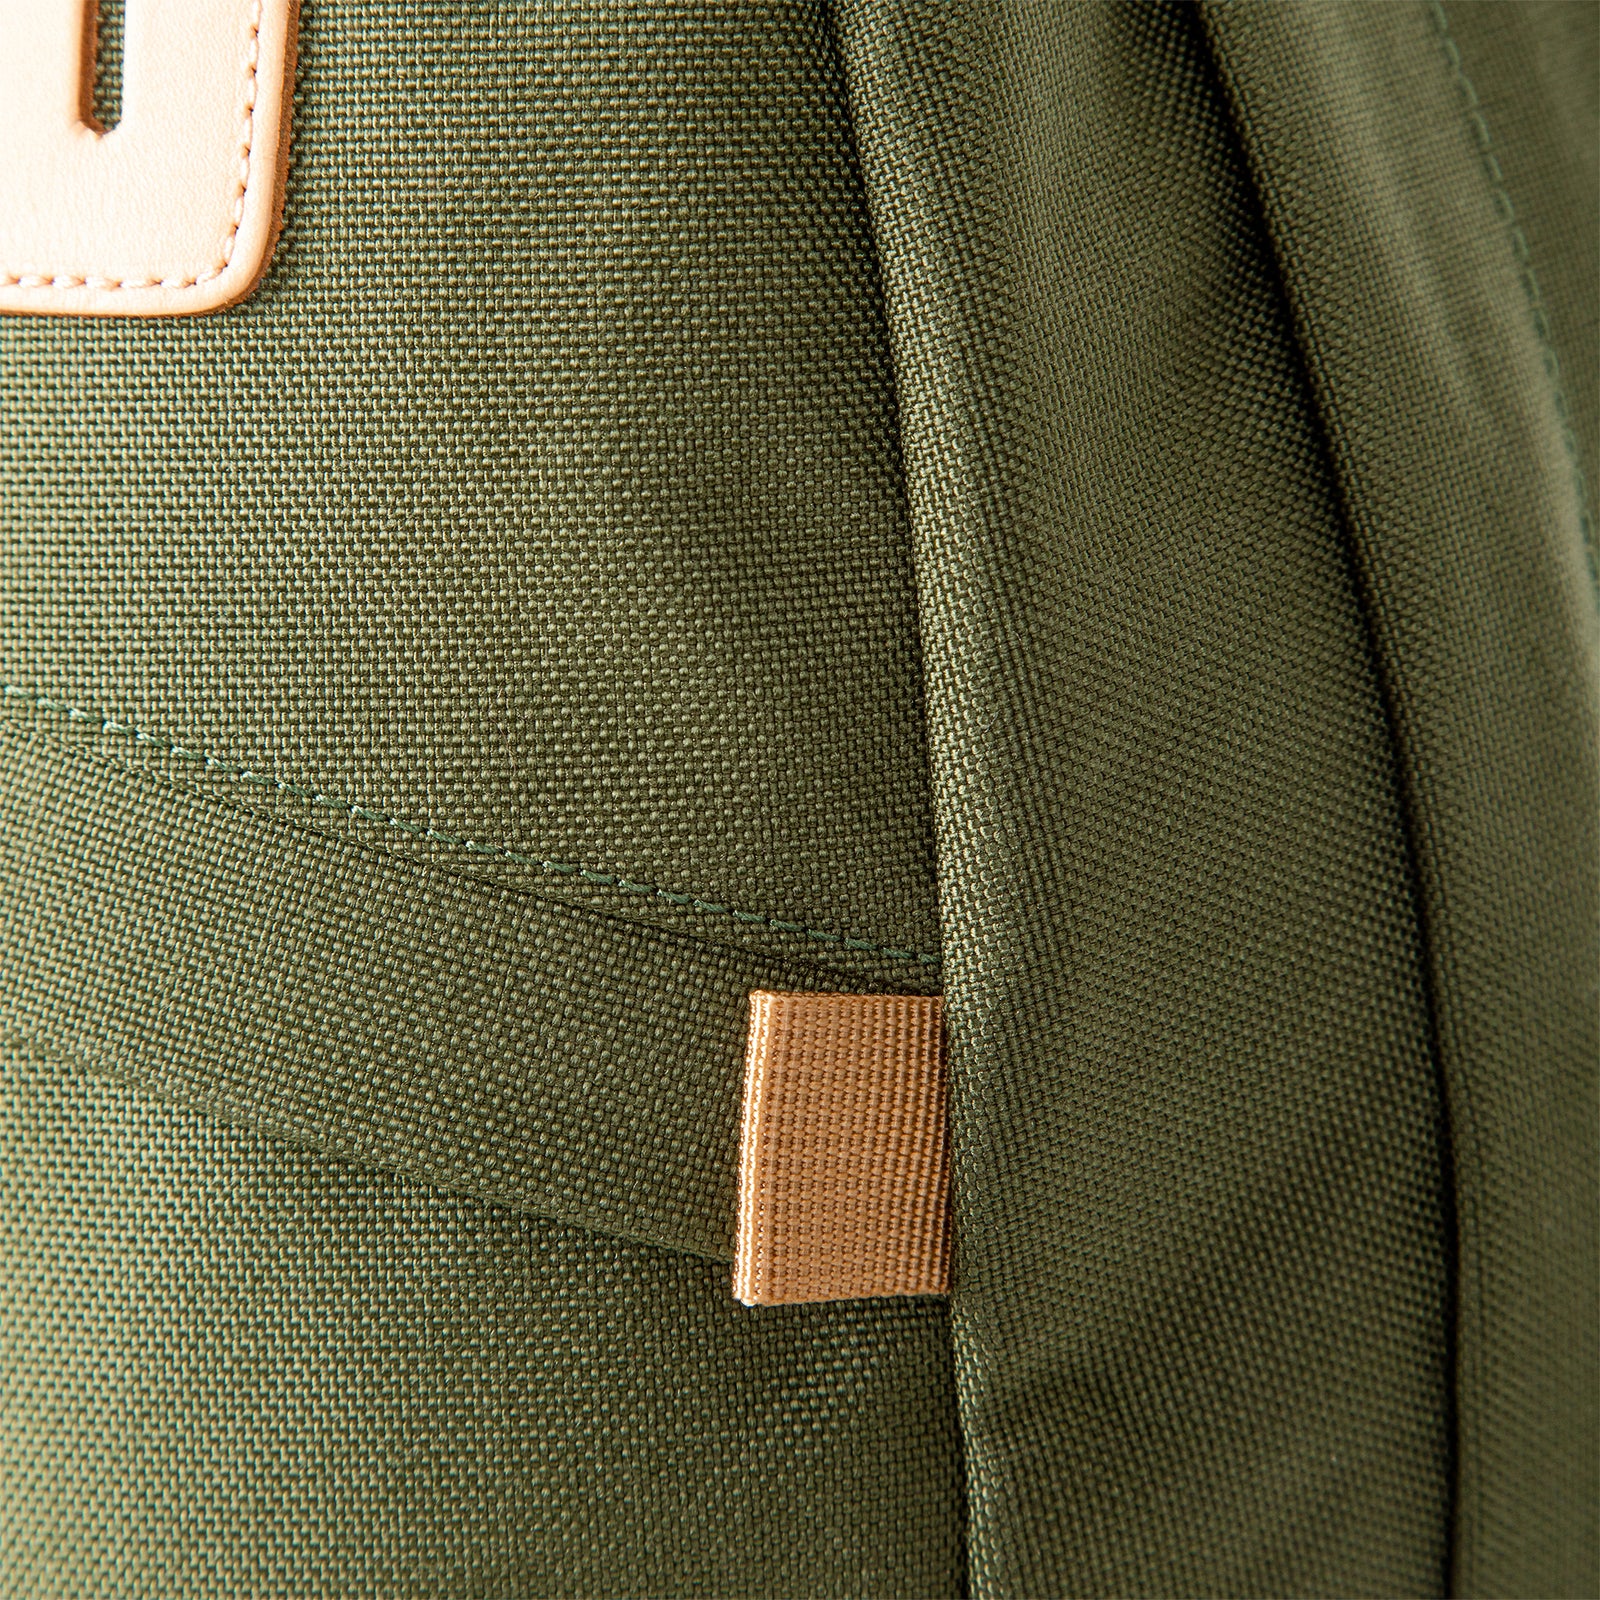 General shot of fabric detail on Topo Designs Daypack Classic 100% recycled nylon laptop backpack for work or school in Olive green.